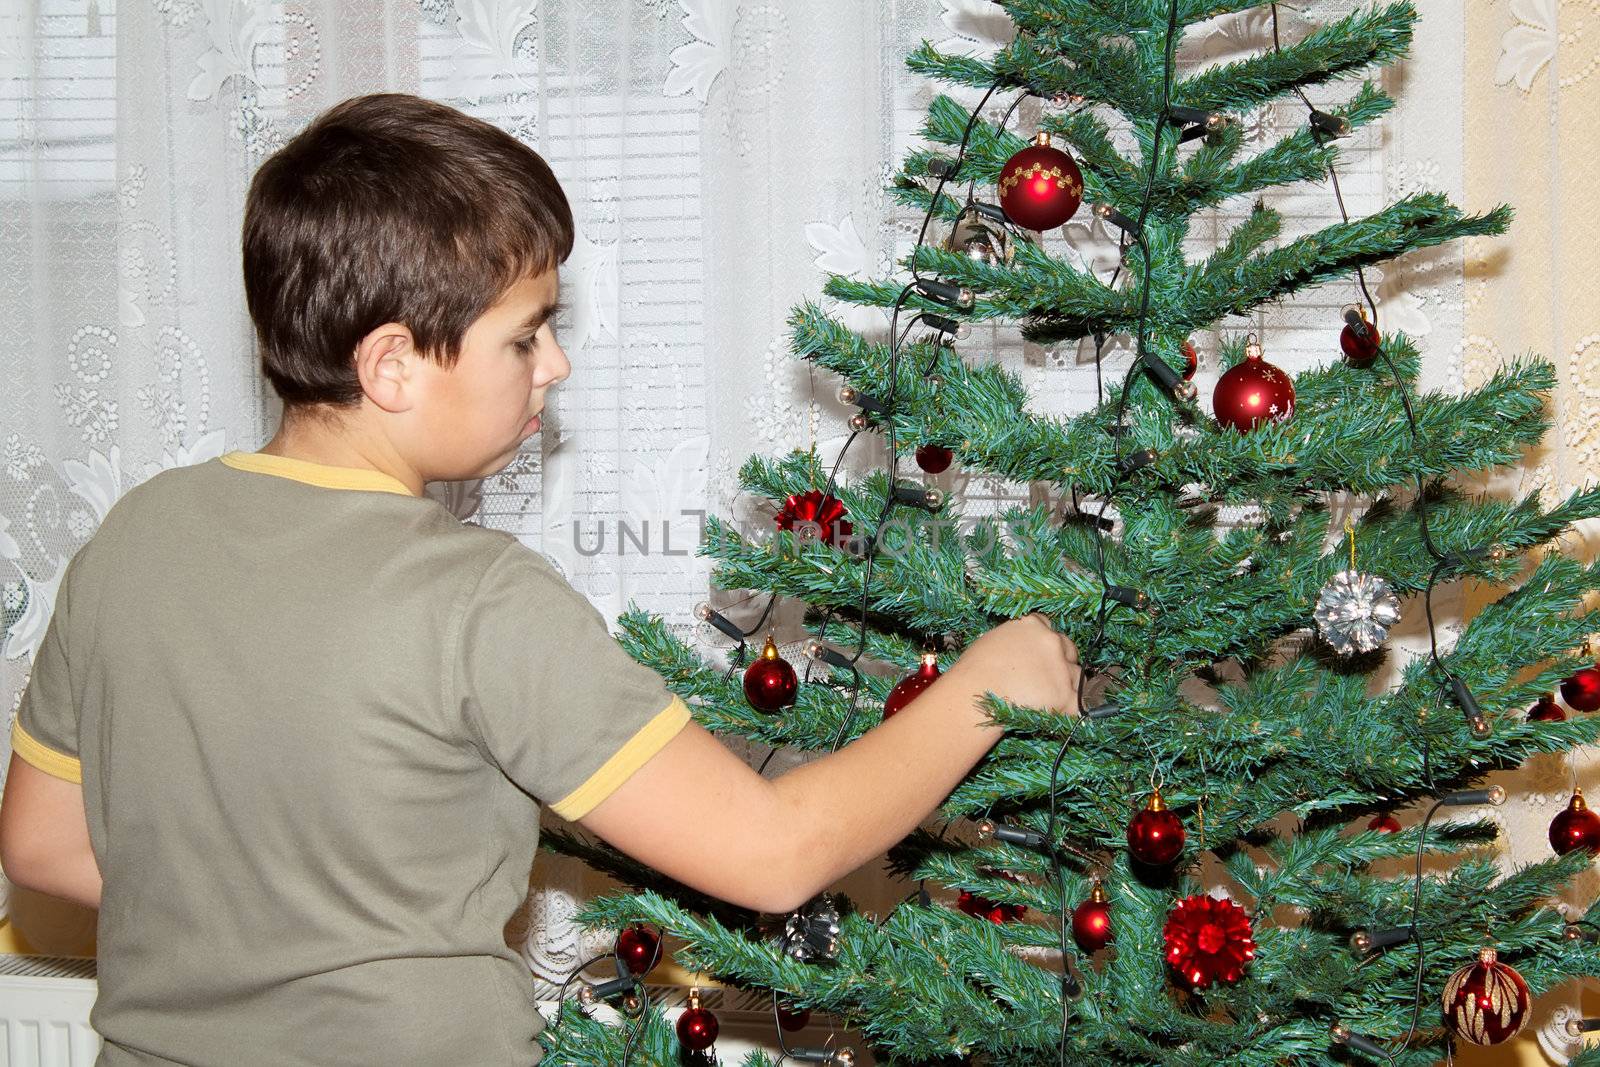 Young boy holding Christmas decorations by artush